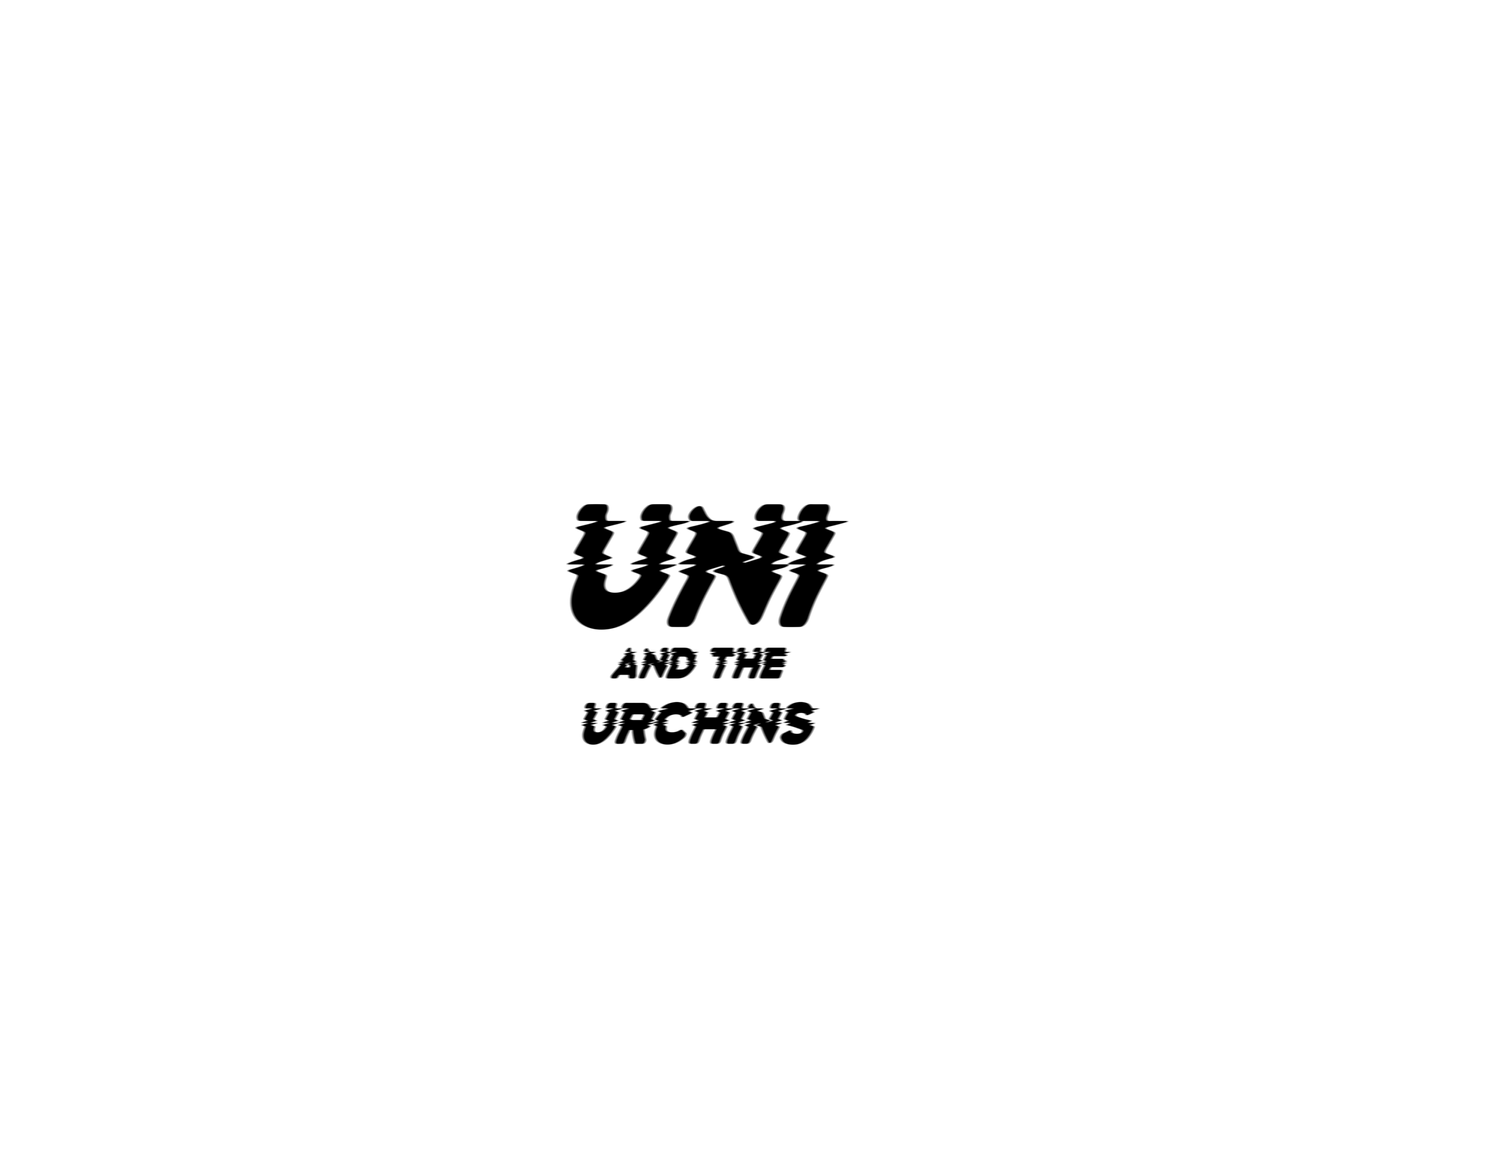 UNI and The Urchins (Copy)